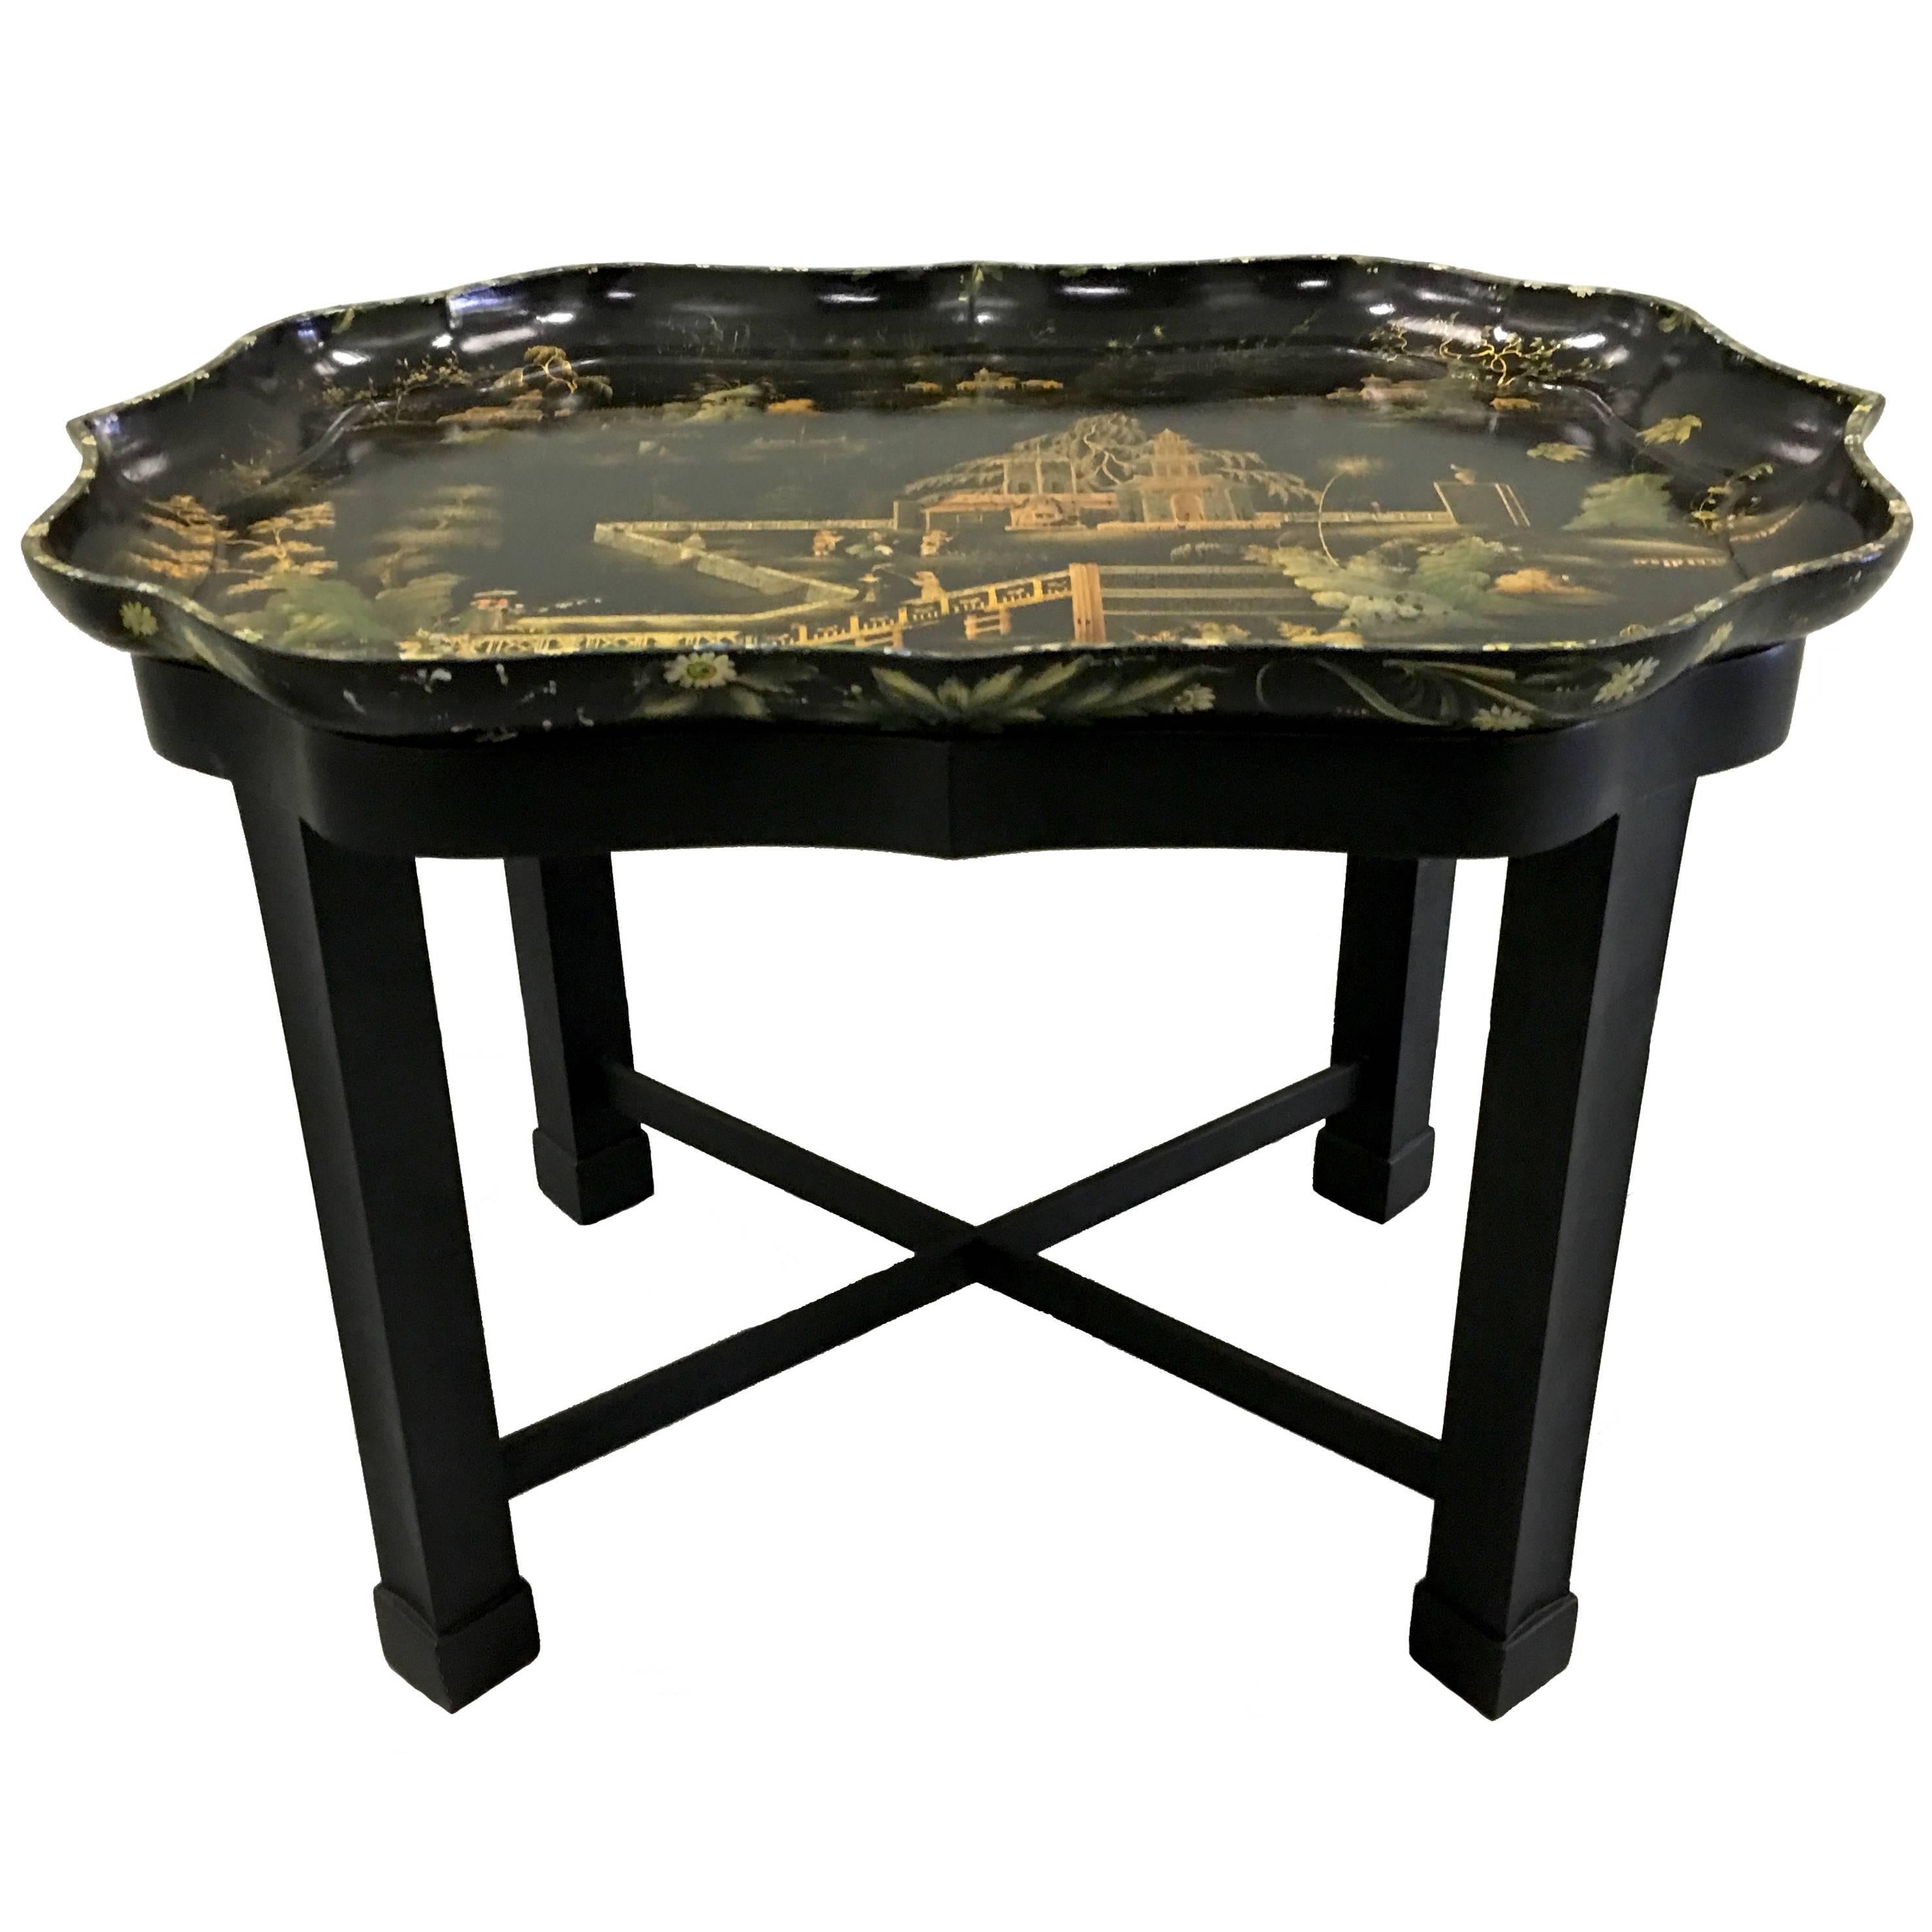 Chinoiserie Papier Mâché Tray on Stand by Henry Clay